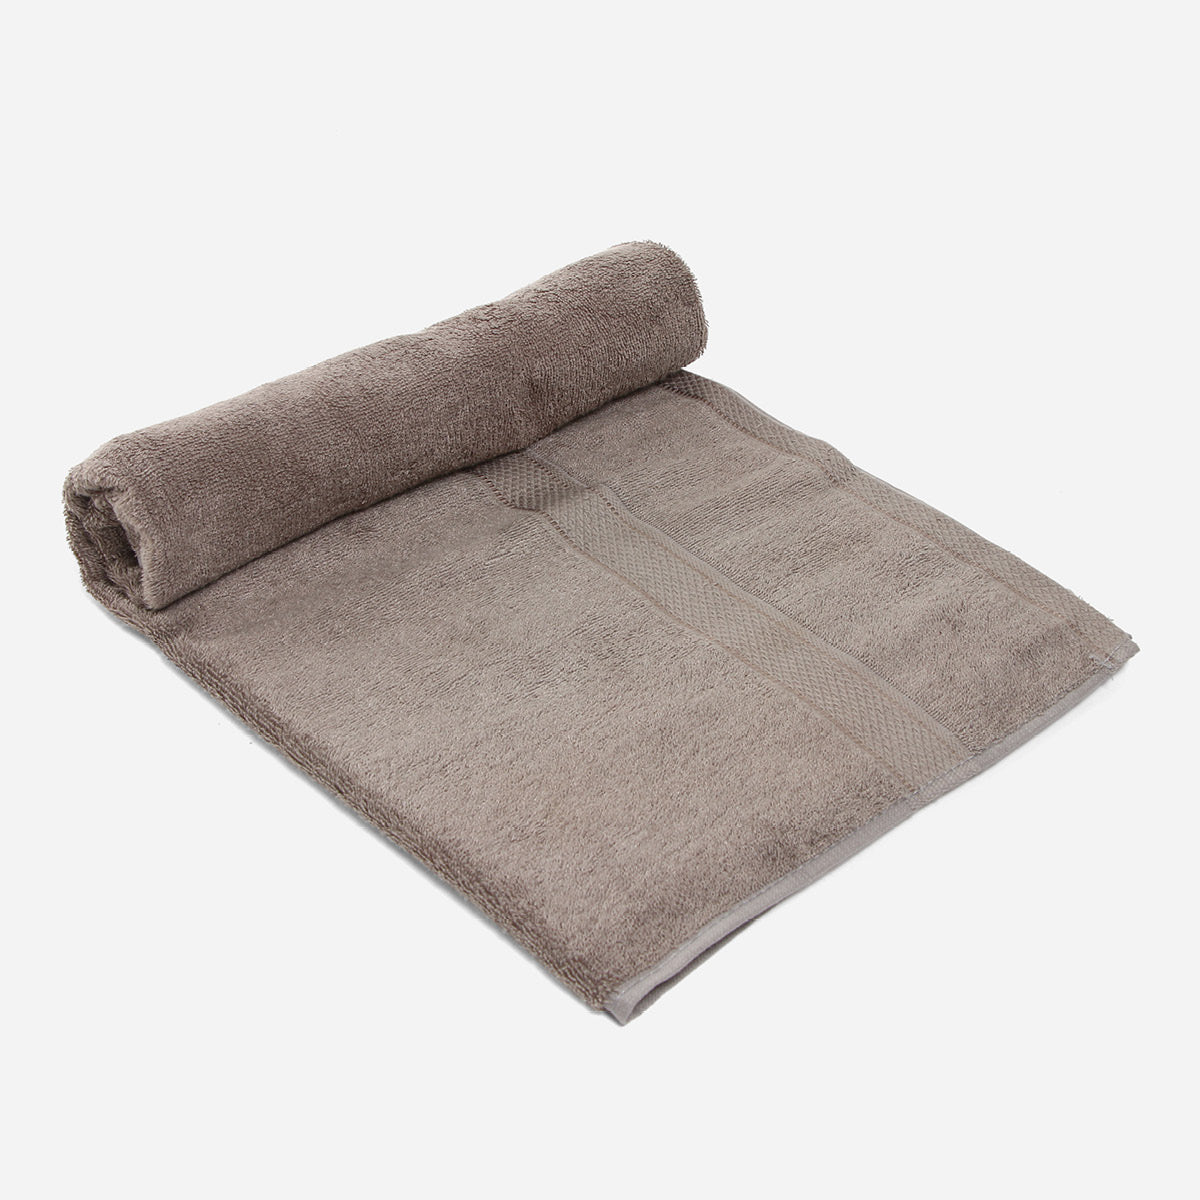 Sustainable Bamboo Bath Towel - Charcoal Gray - Made in Turkey – Mosobam®